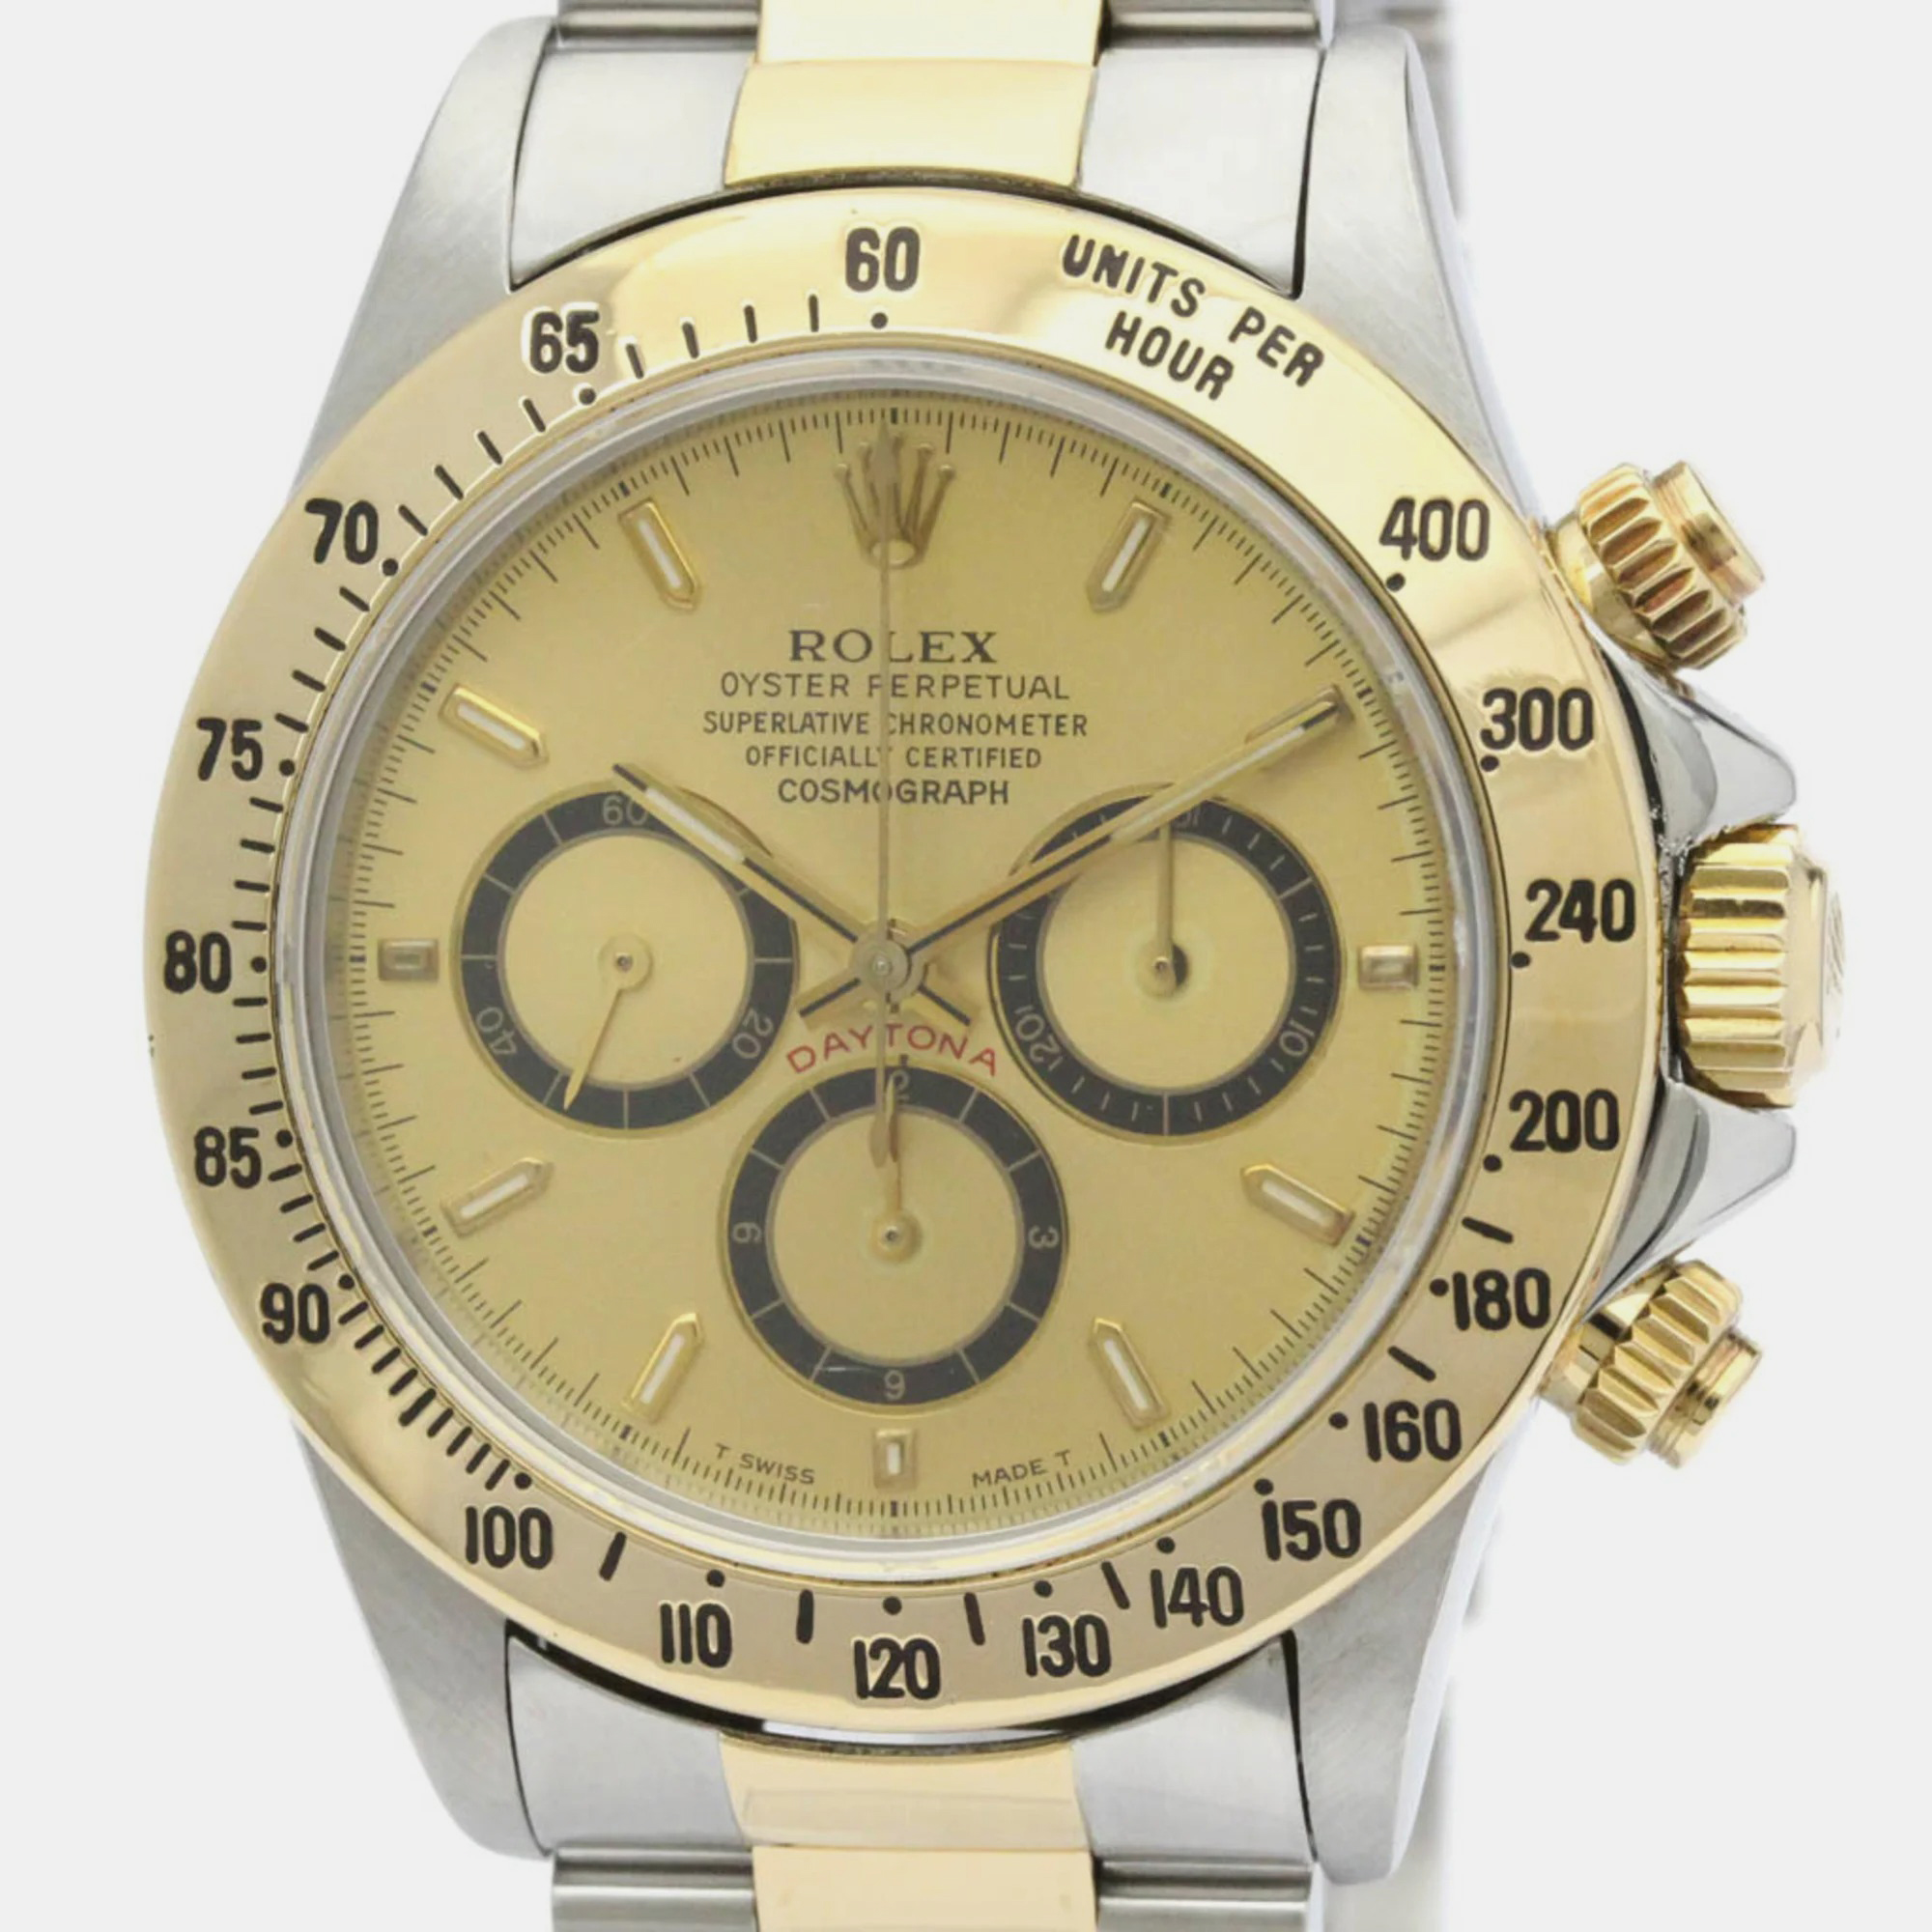 Rolex Champagne 18k Yellow Gold And Stainless Steel Cosmograph Daytona 16523 Automatic Men's Wristwatch 40 Mm